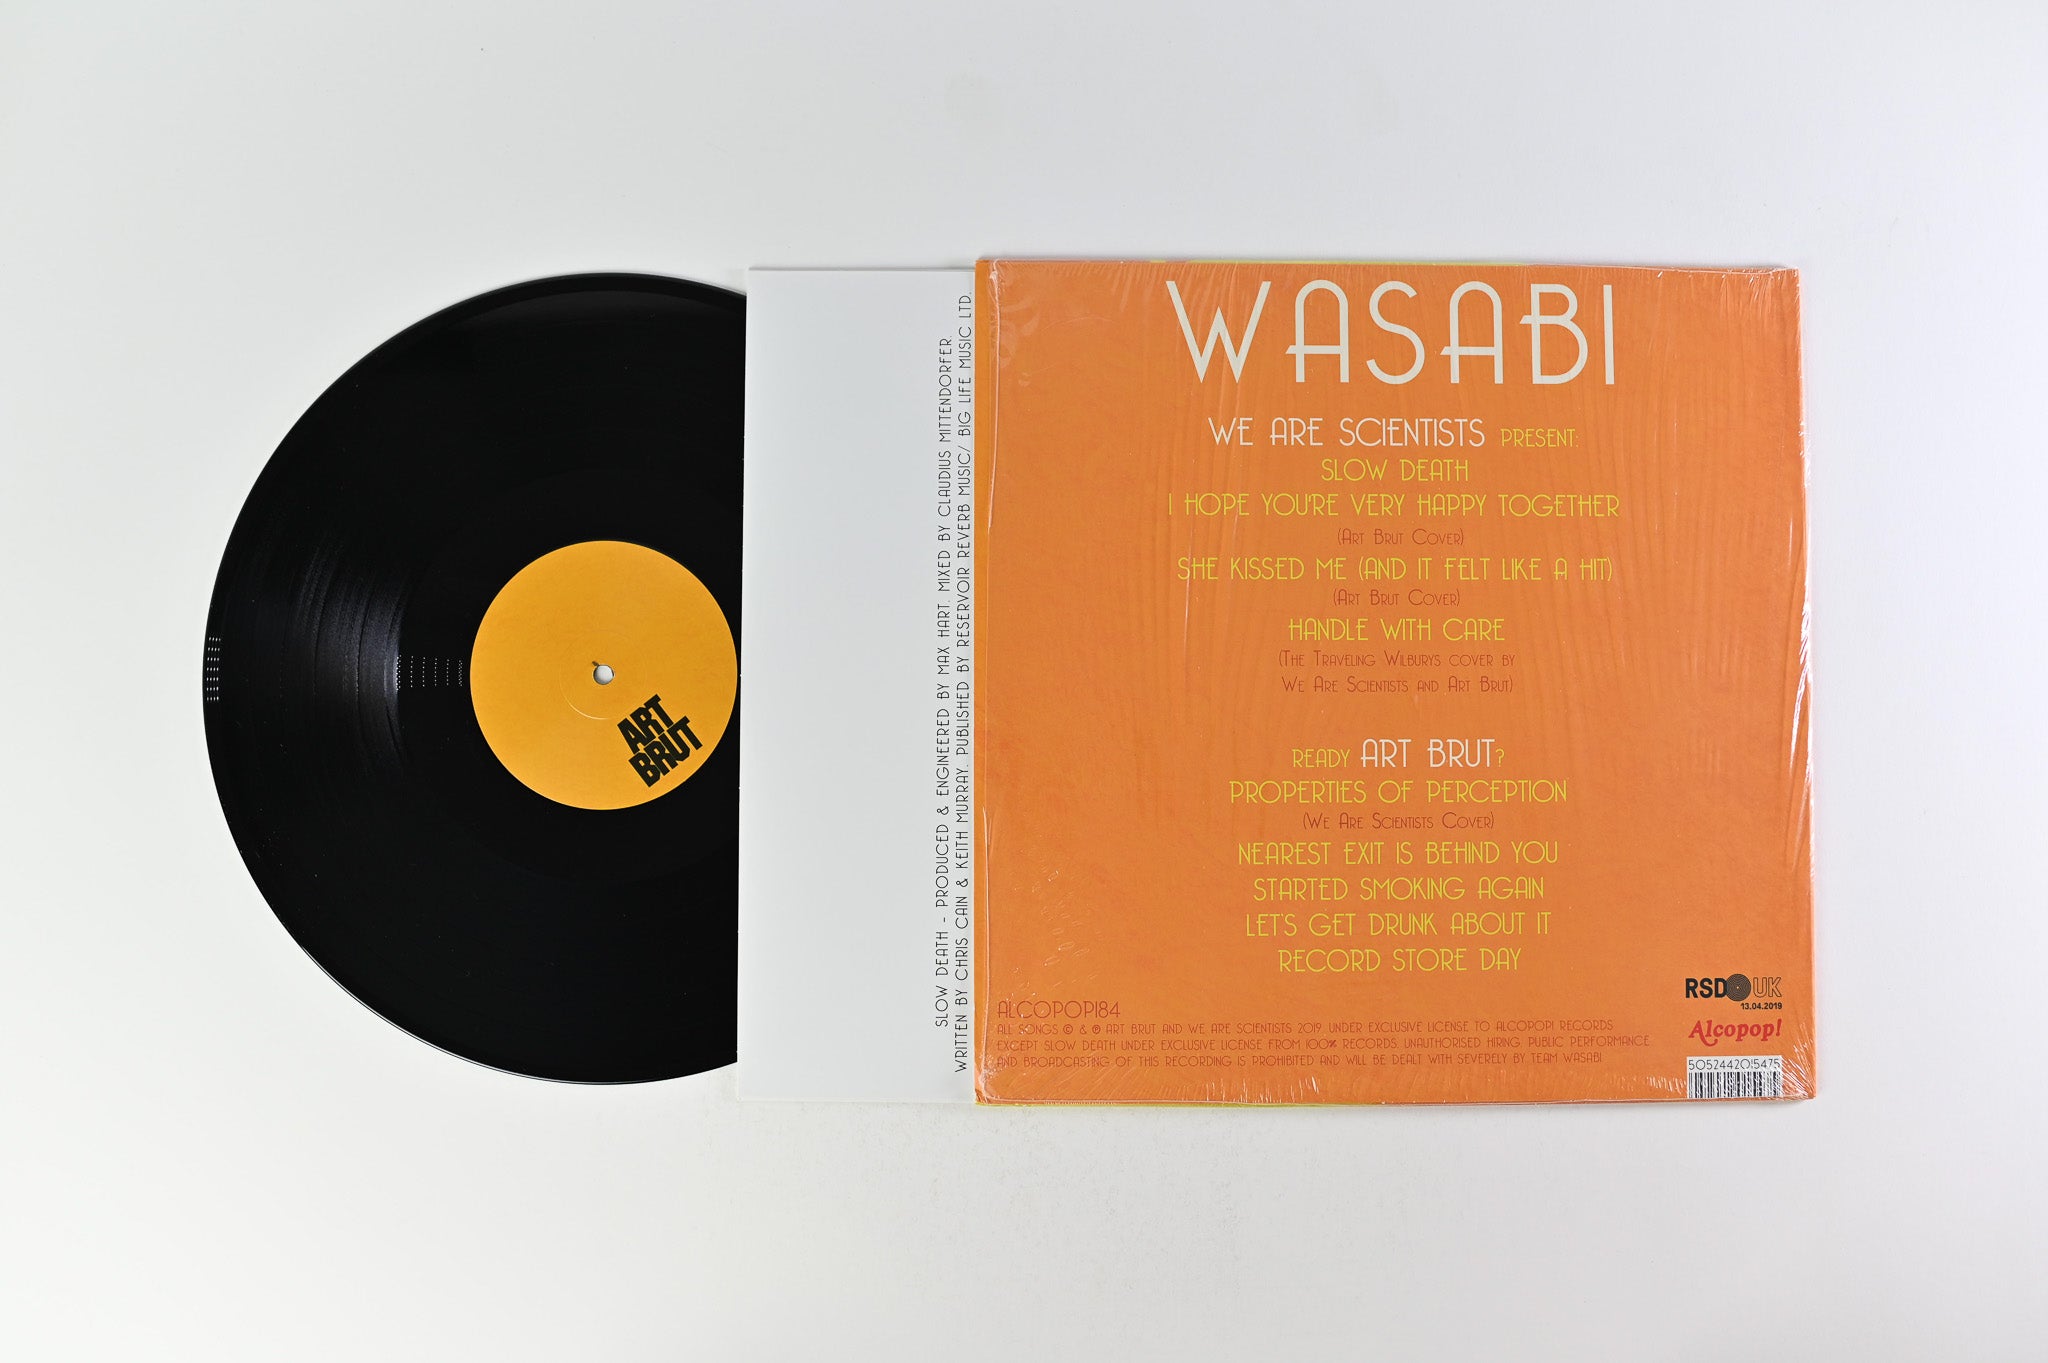 We Are Scientists - Wasabi RSD Release on Alcopop! Records